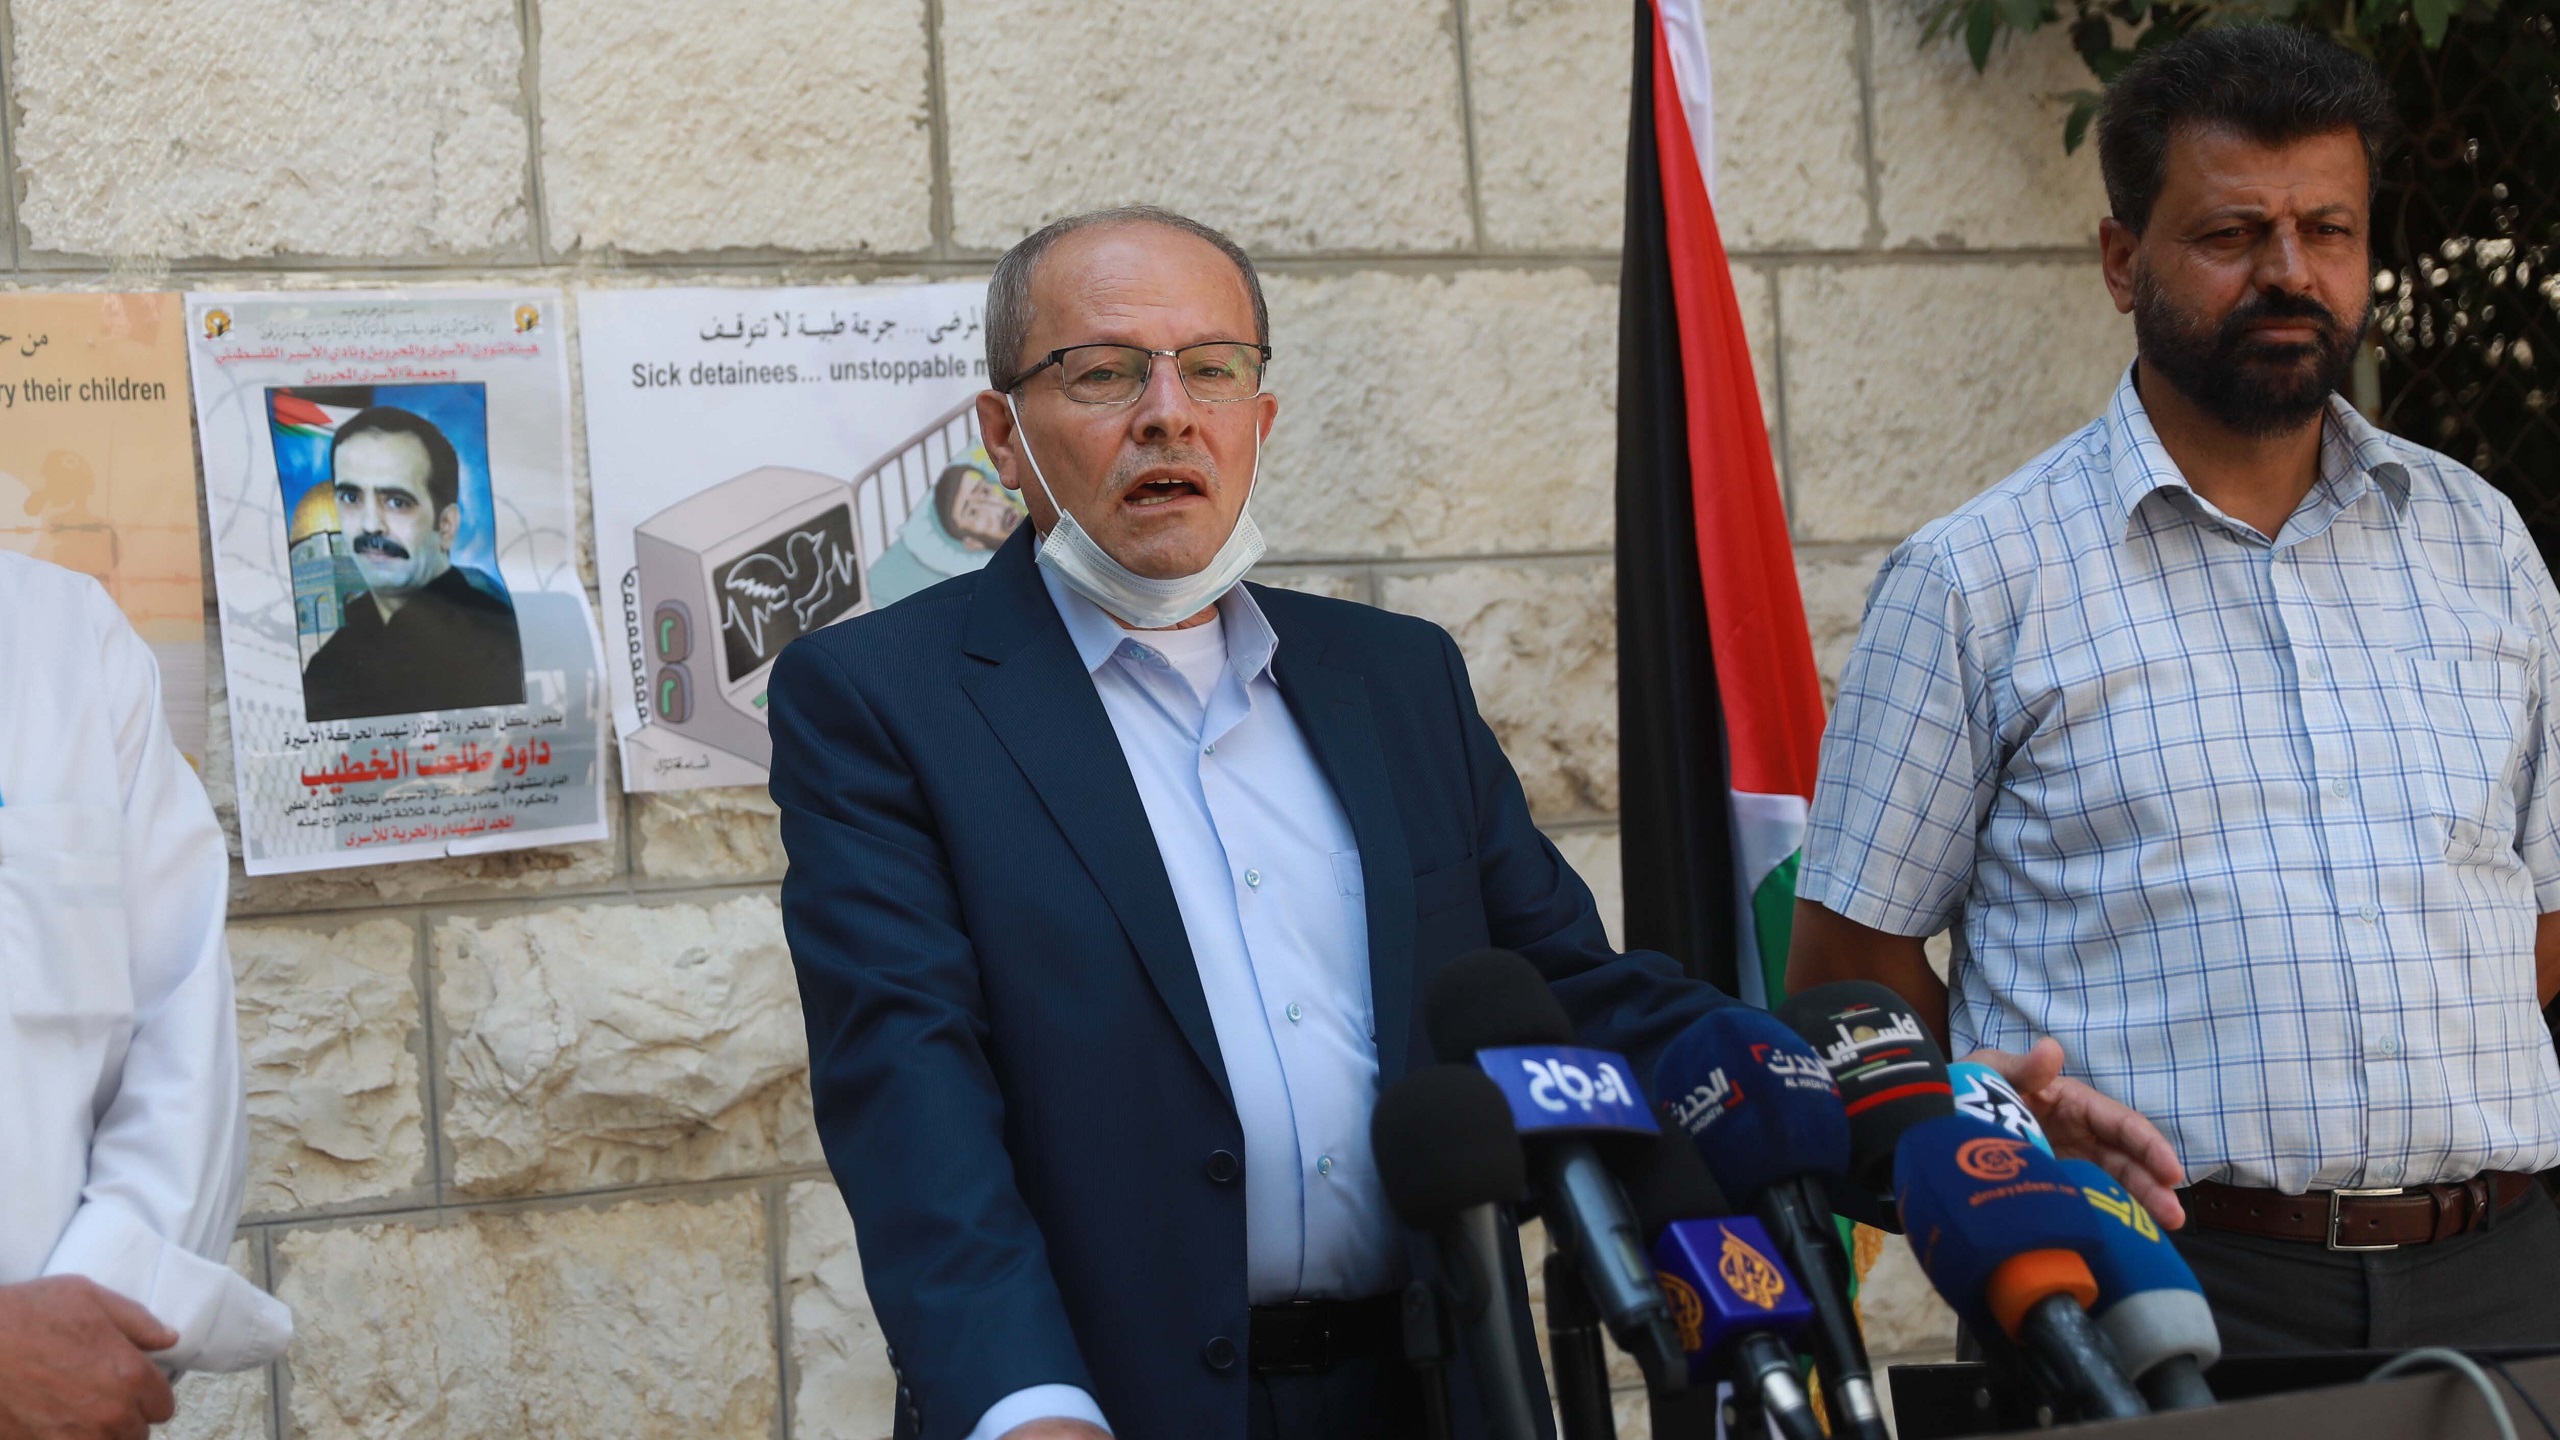 Palestinian Authority Minister and Former Prisoner Killed in West Bank Car Crash